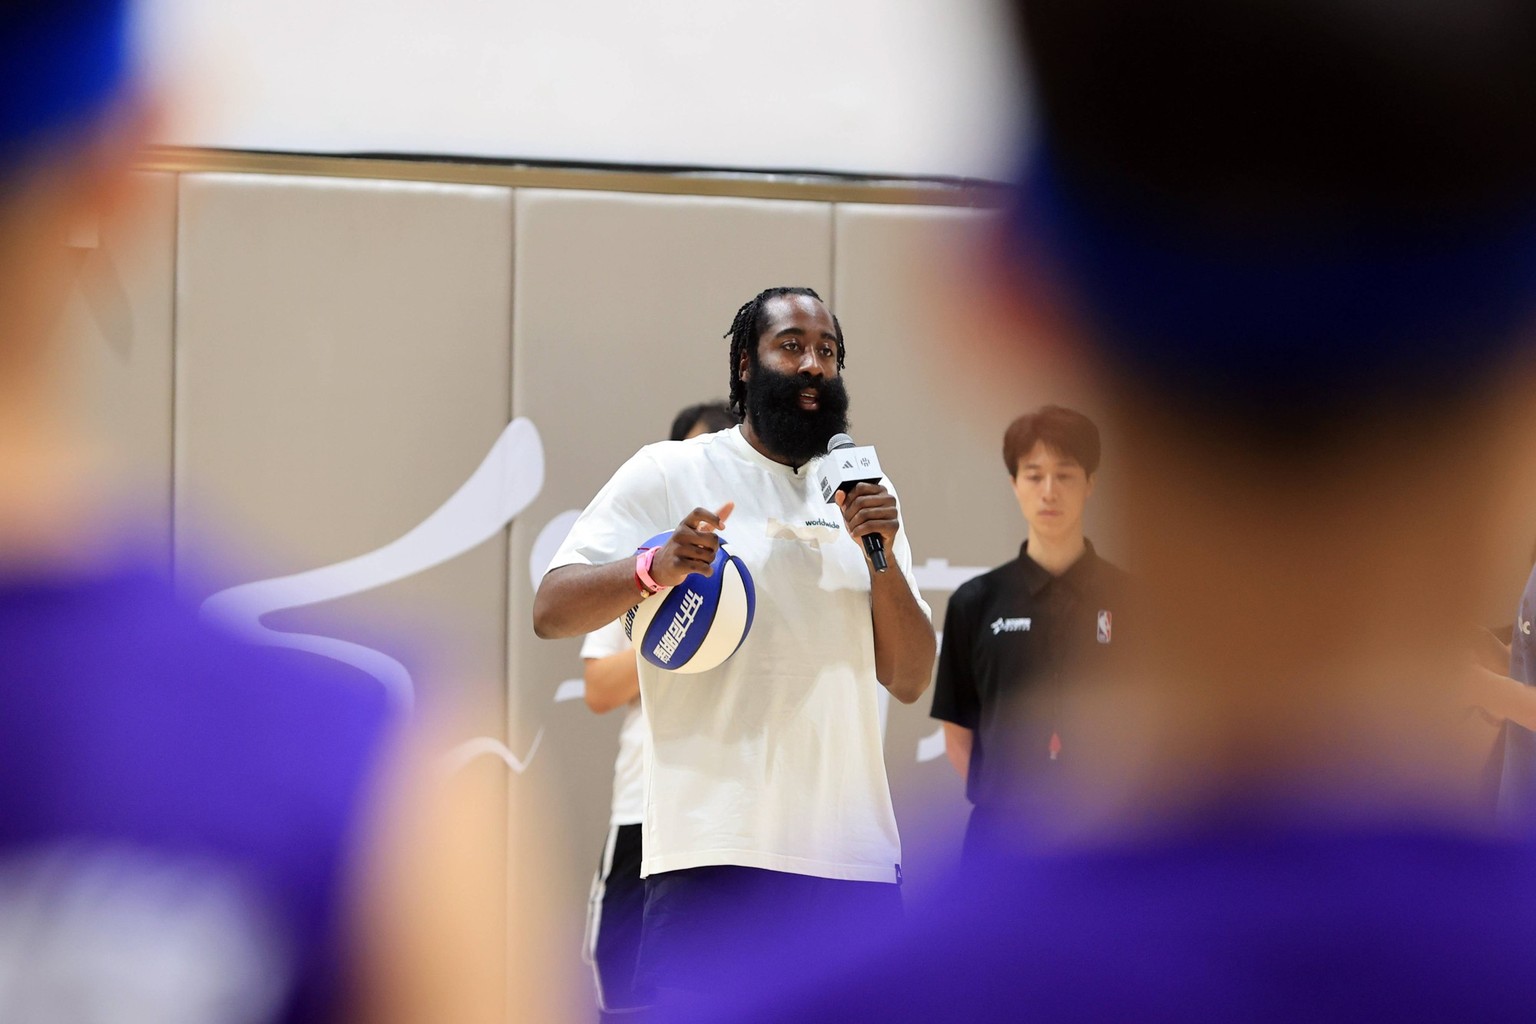 SHANGHAI, CHINA - AUGUST 13: James Harden, American basketball player for the Philadelphia 76ers of the National Basketball Association NBA, Basketball Herren, USA , speaks during his China tour on Au ...